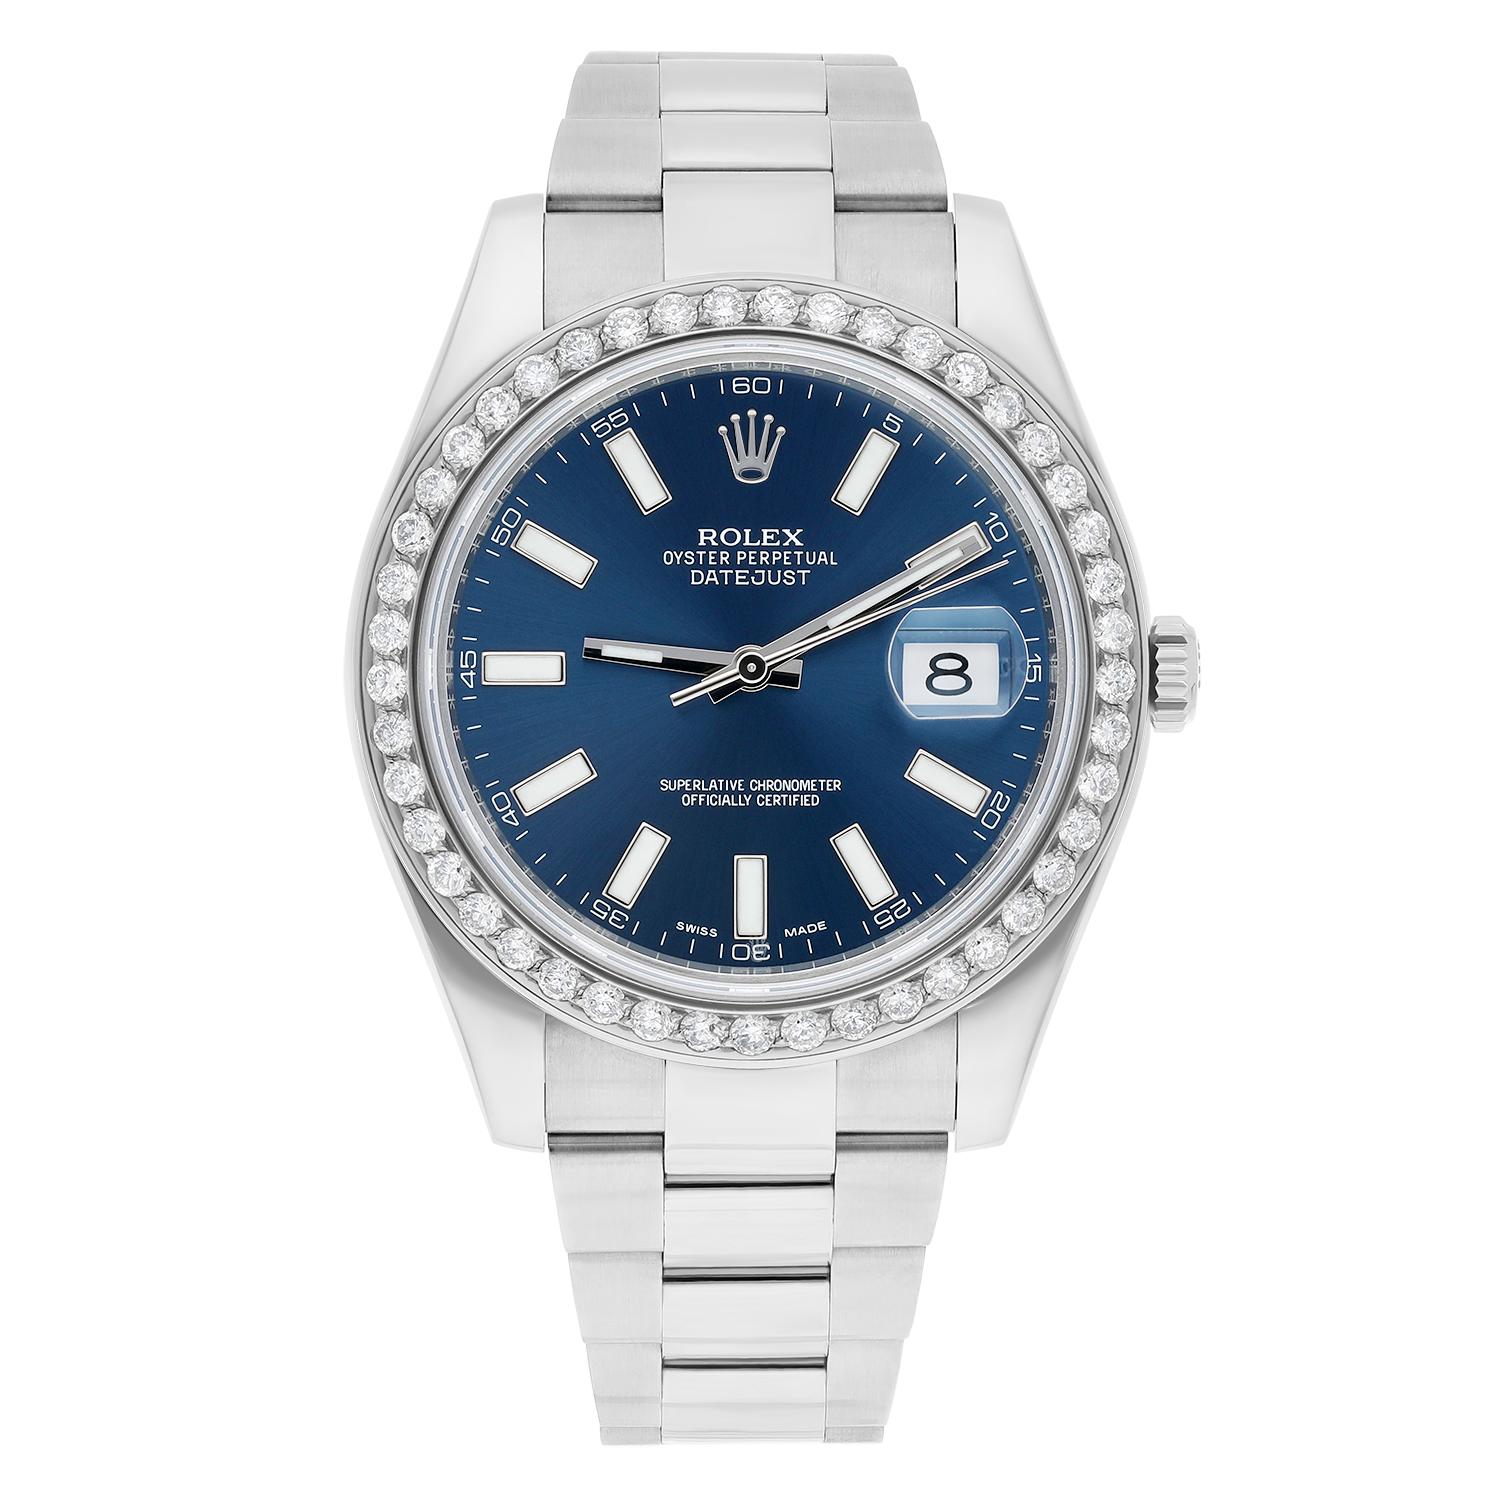 This watch has been professionally polished, serviced and does not have any visible scratches or blemishes. It can easily pass as unworn. Diamonds are 100% natural. Sale comes with a Rolex box, appraisal certificate validating authenticity of the